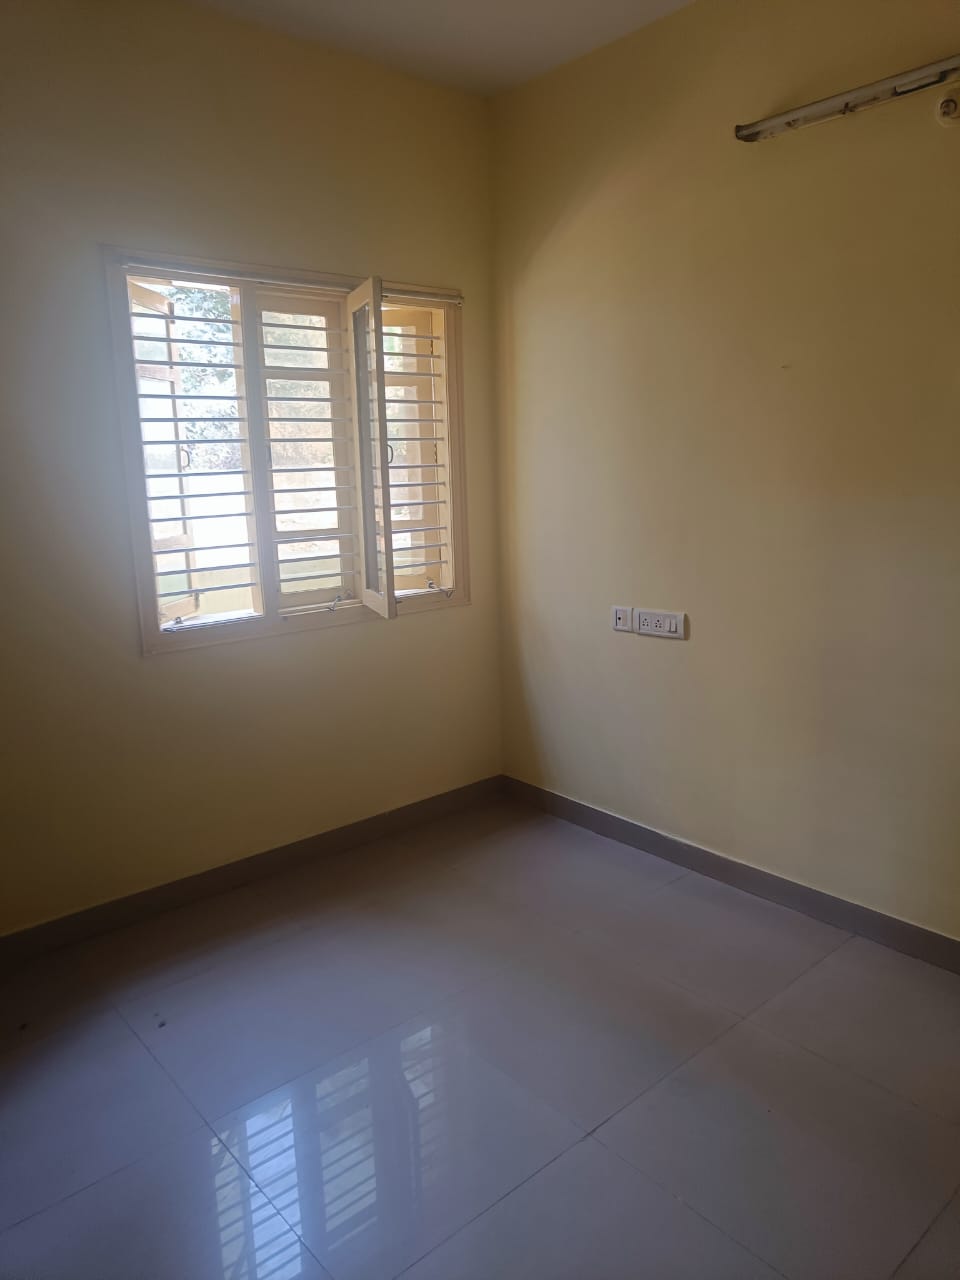 1 BHK Independent House for Lease Only at JAML2 - 3244 in Harlur